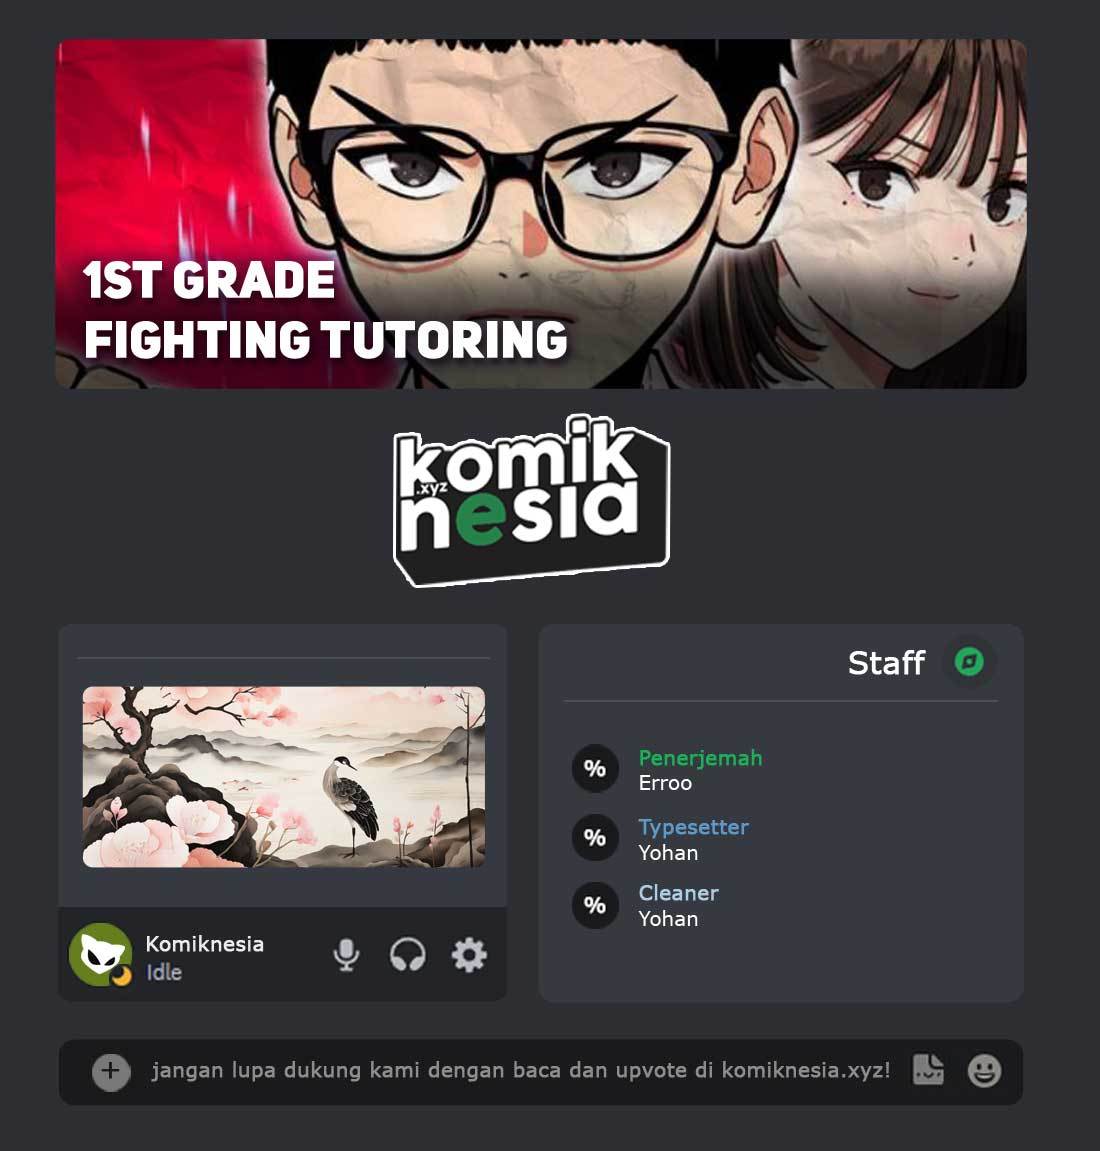 Top 1 Fighting Tutoring Chapter 8